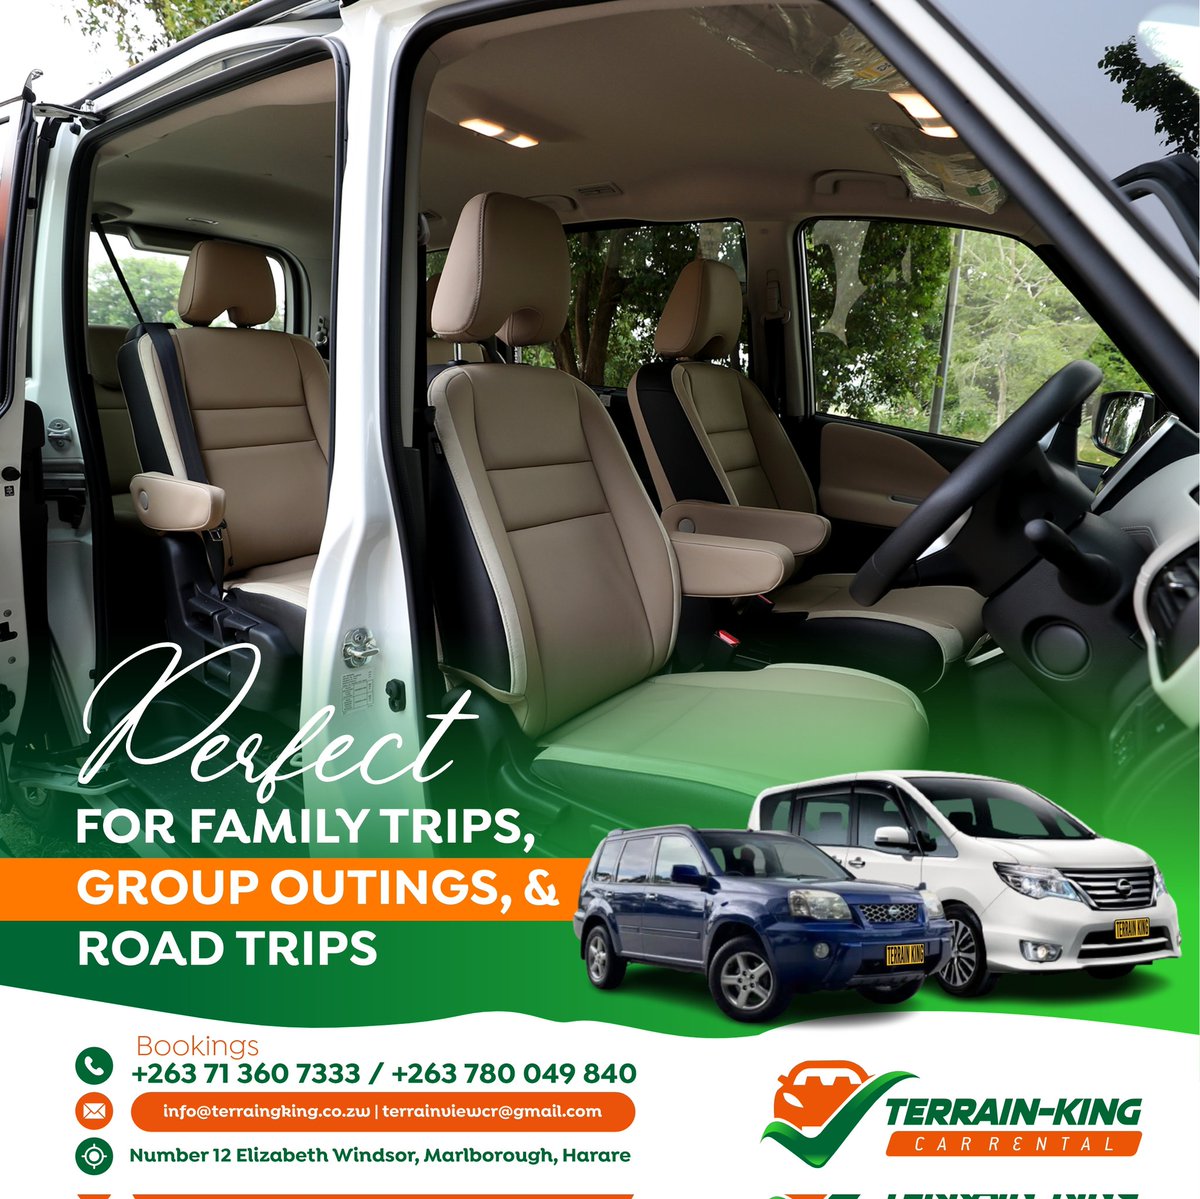 7 SEATER FOR HIRE!!

Perfect for family trips, group outings and business transportation in luxury and comfort.

Come journey with us. 

Book now
+263713607333 /+263780049840

#terrainkingcarrental #7Seater #7seaterforhire  #JourneywithUs #affordabletravel #CheapCarHire #carhire